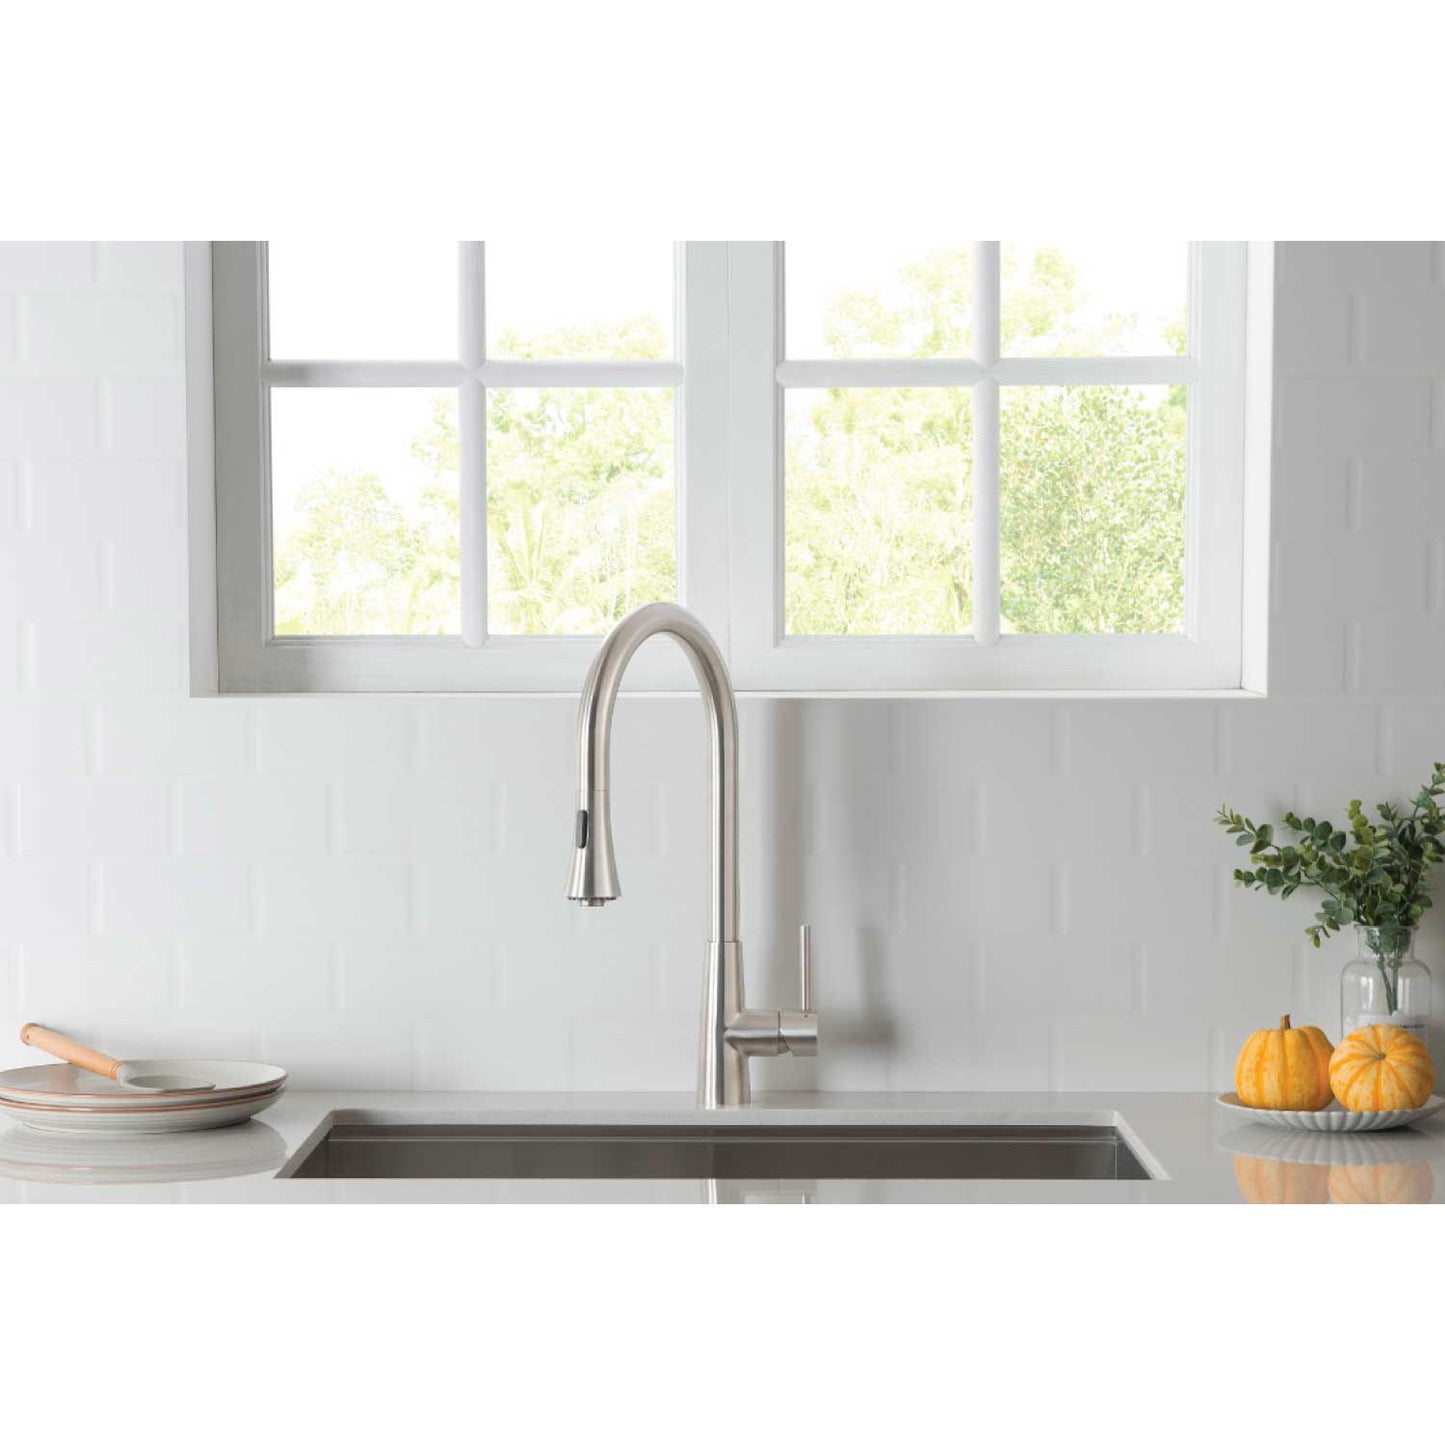 Isenberg Klassiker Zest 18" Single Hole Army Green Stainless Steel Pull-Down Kitchen Faucet With Dual Function Sprayer